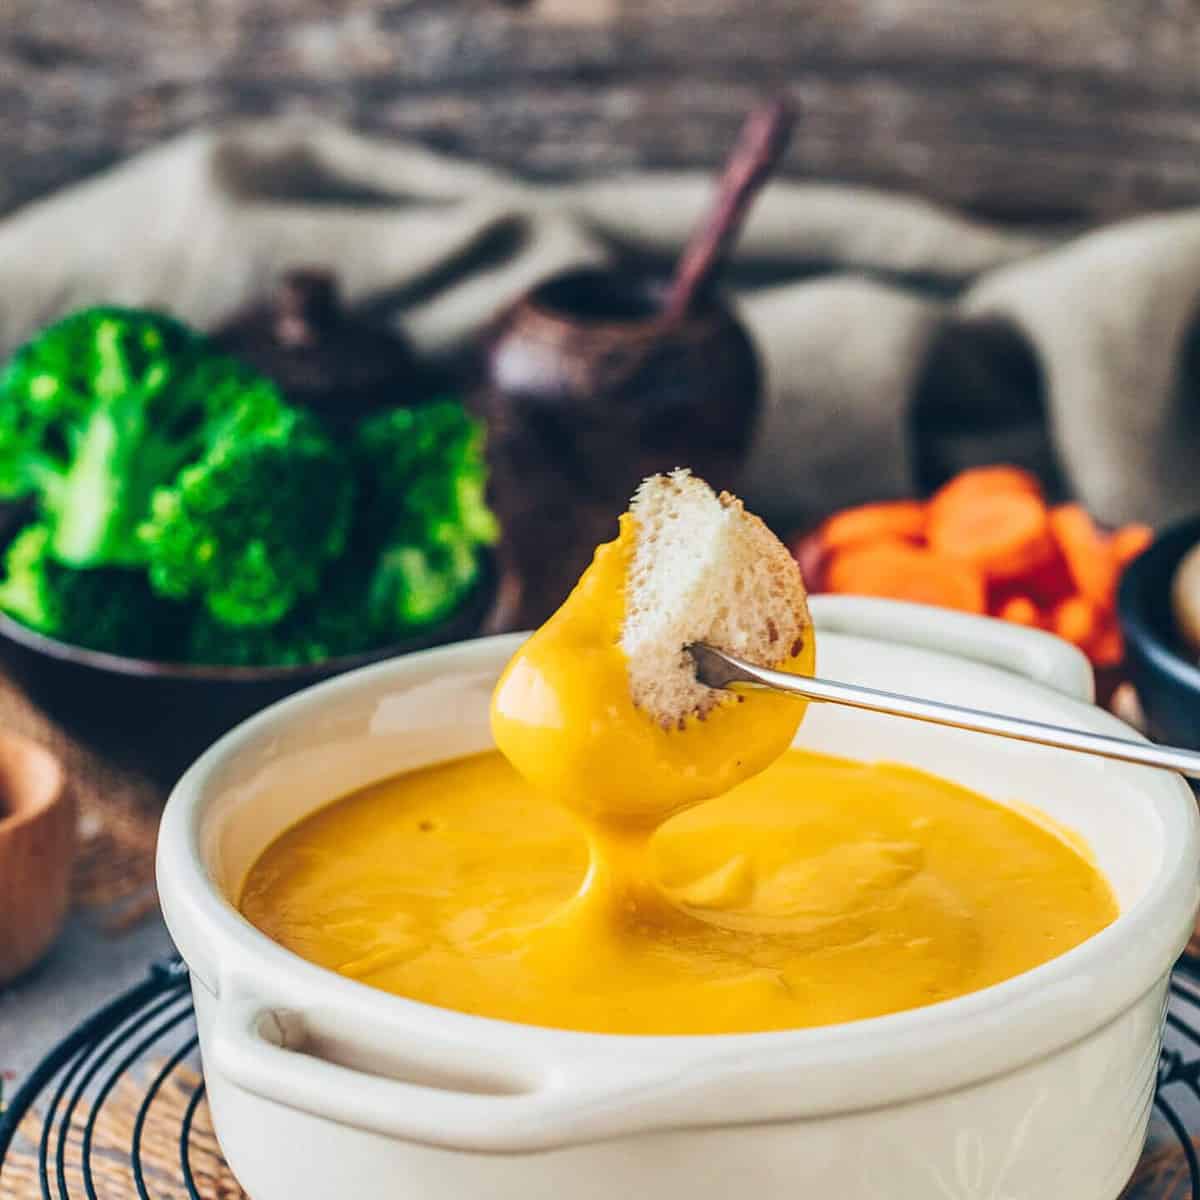  A warm and gooey bowl of vegan cheese fondue